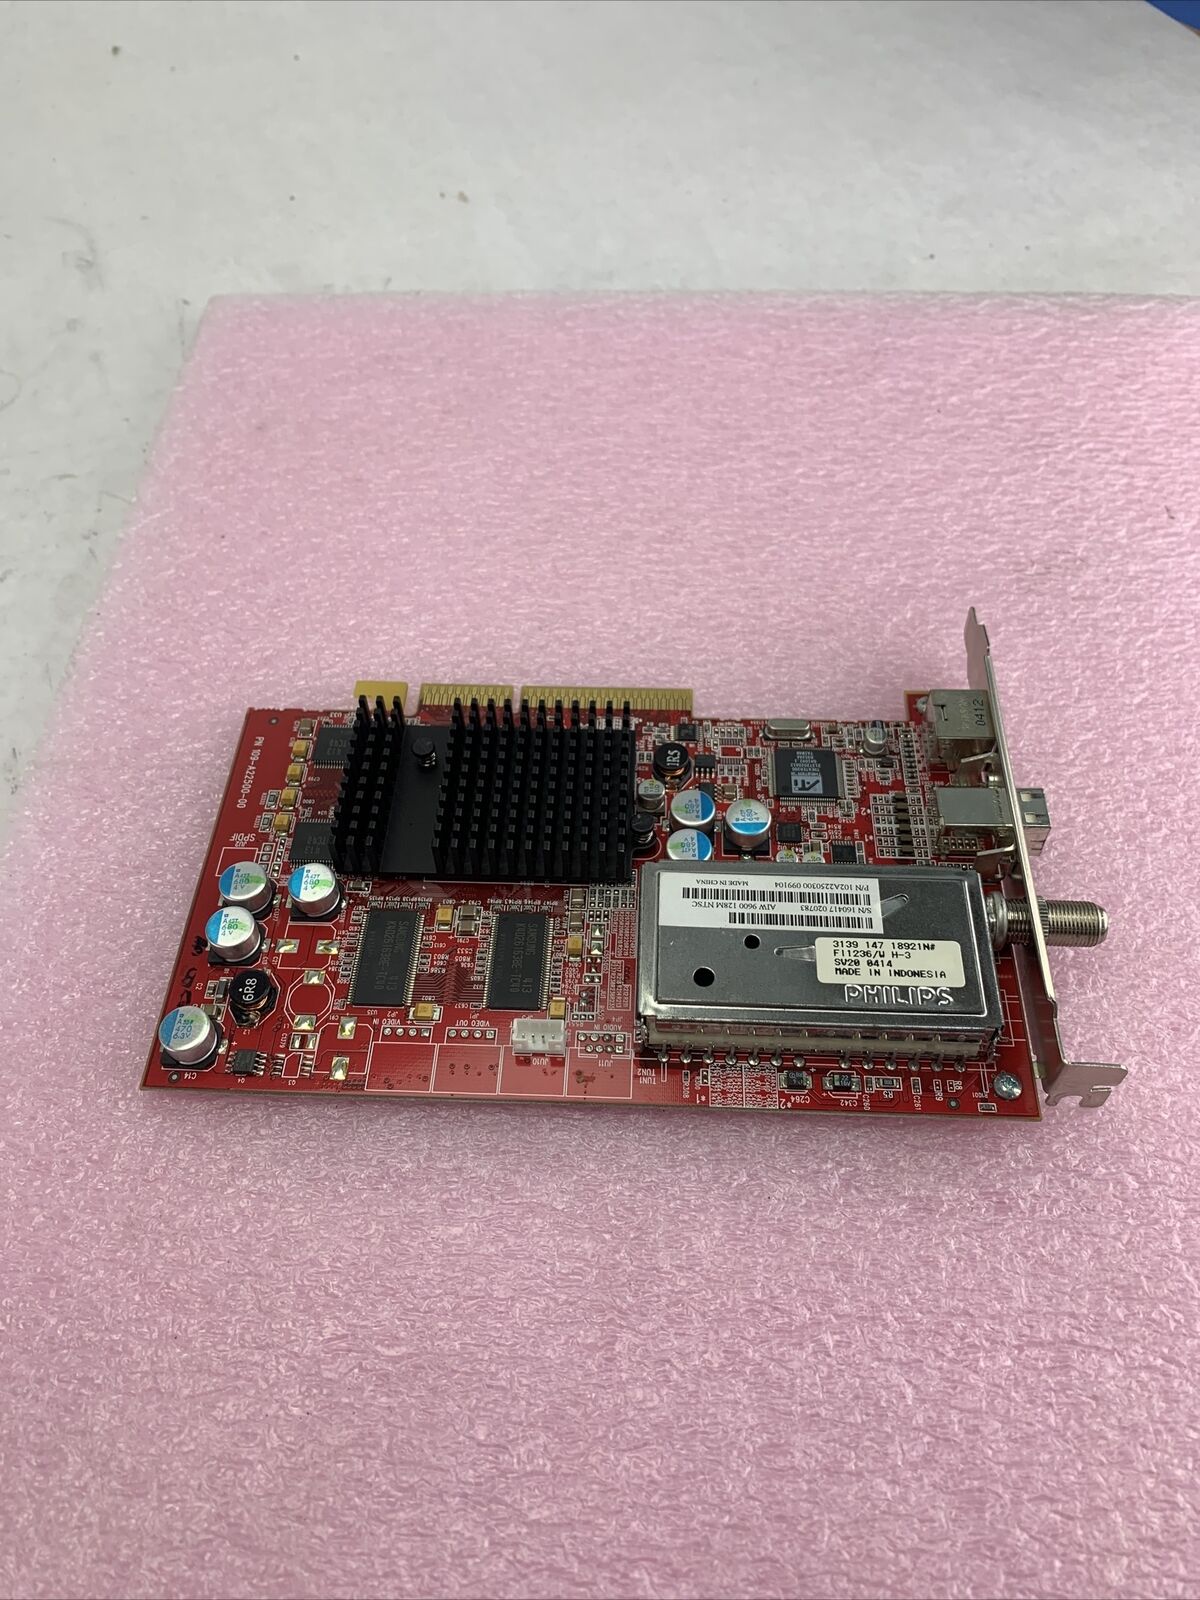 102A2250300 ATI X1300 256MB AGP AV-Out/ TV Tuner Video Graphics Card